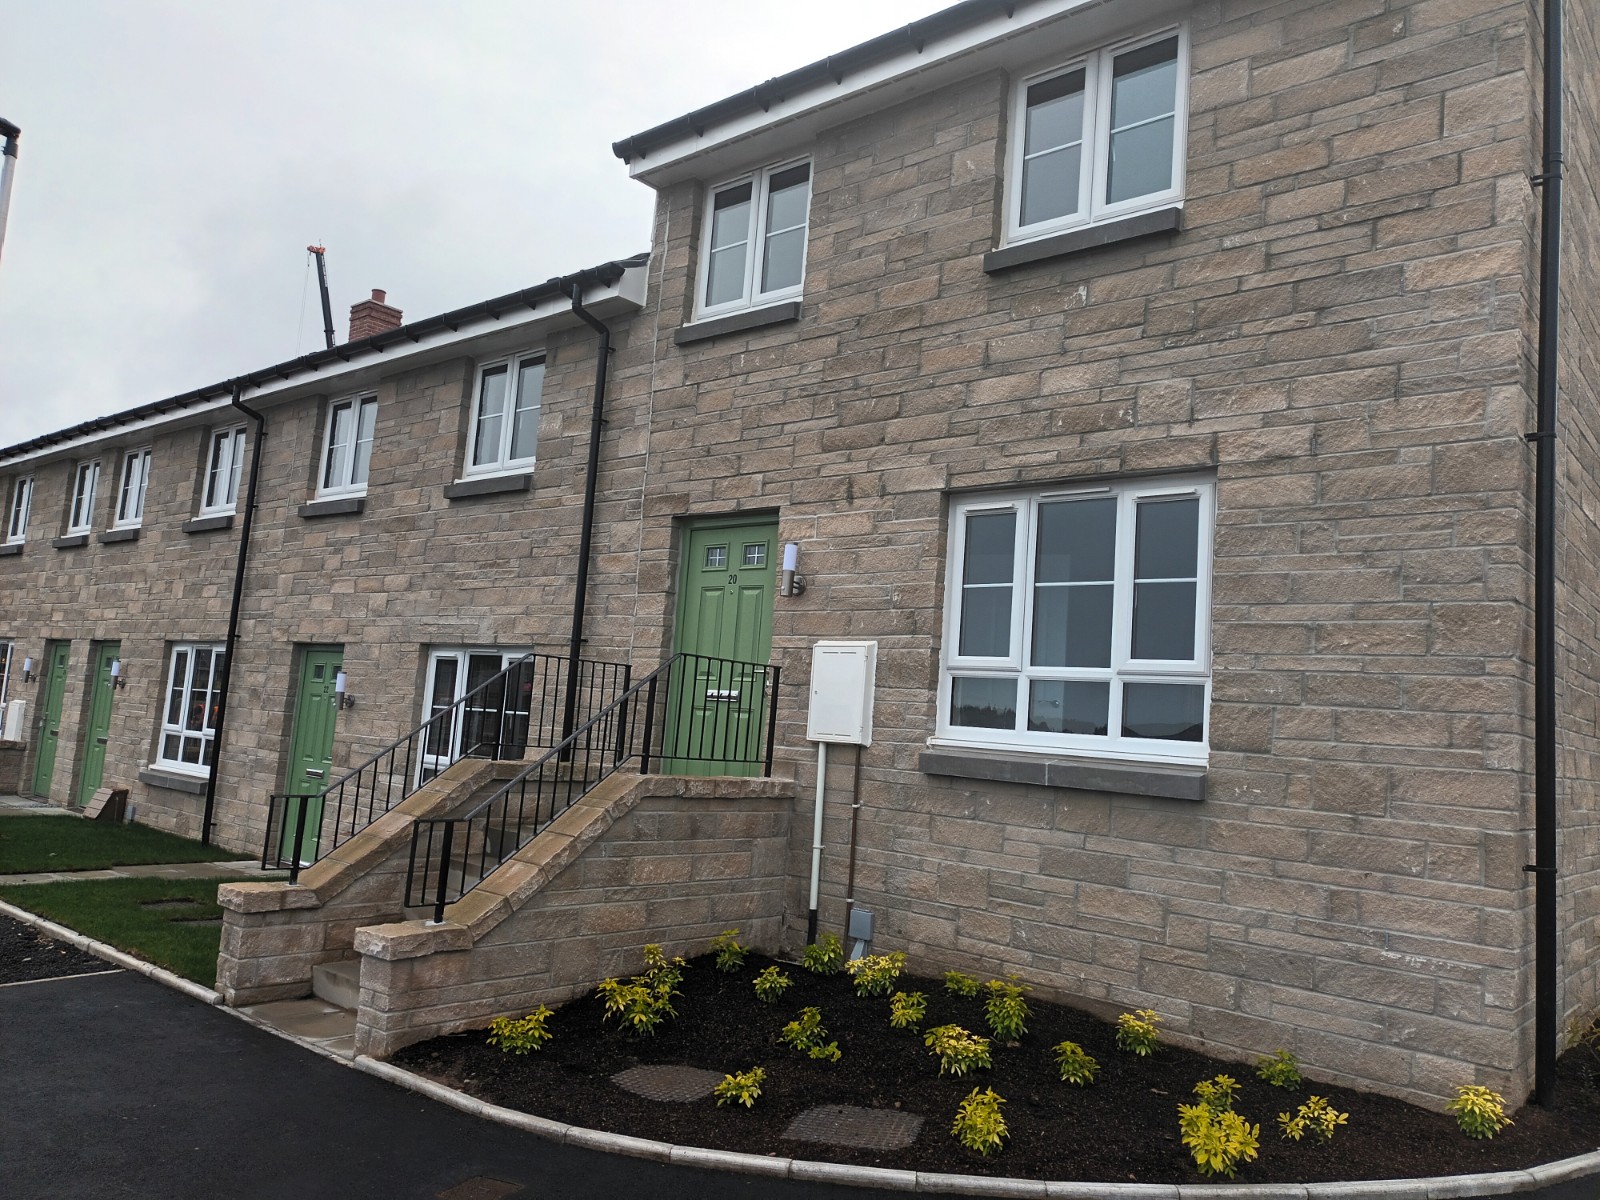 Grampian and Barratt complete first phase of new affordable homes in Elgin